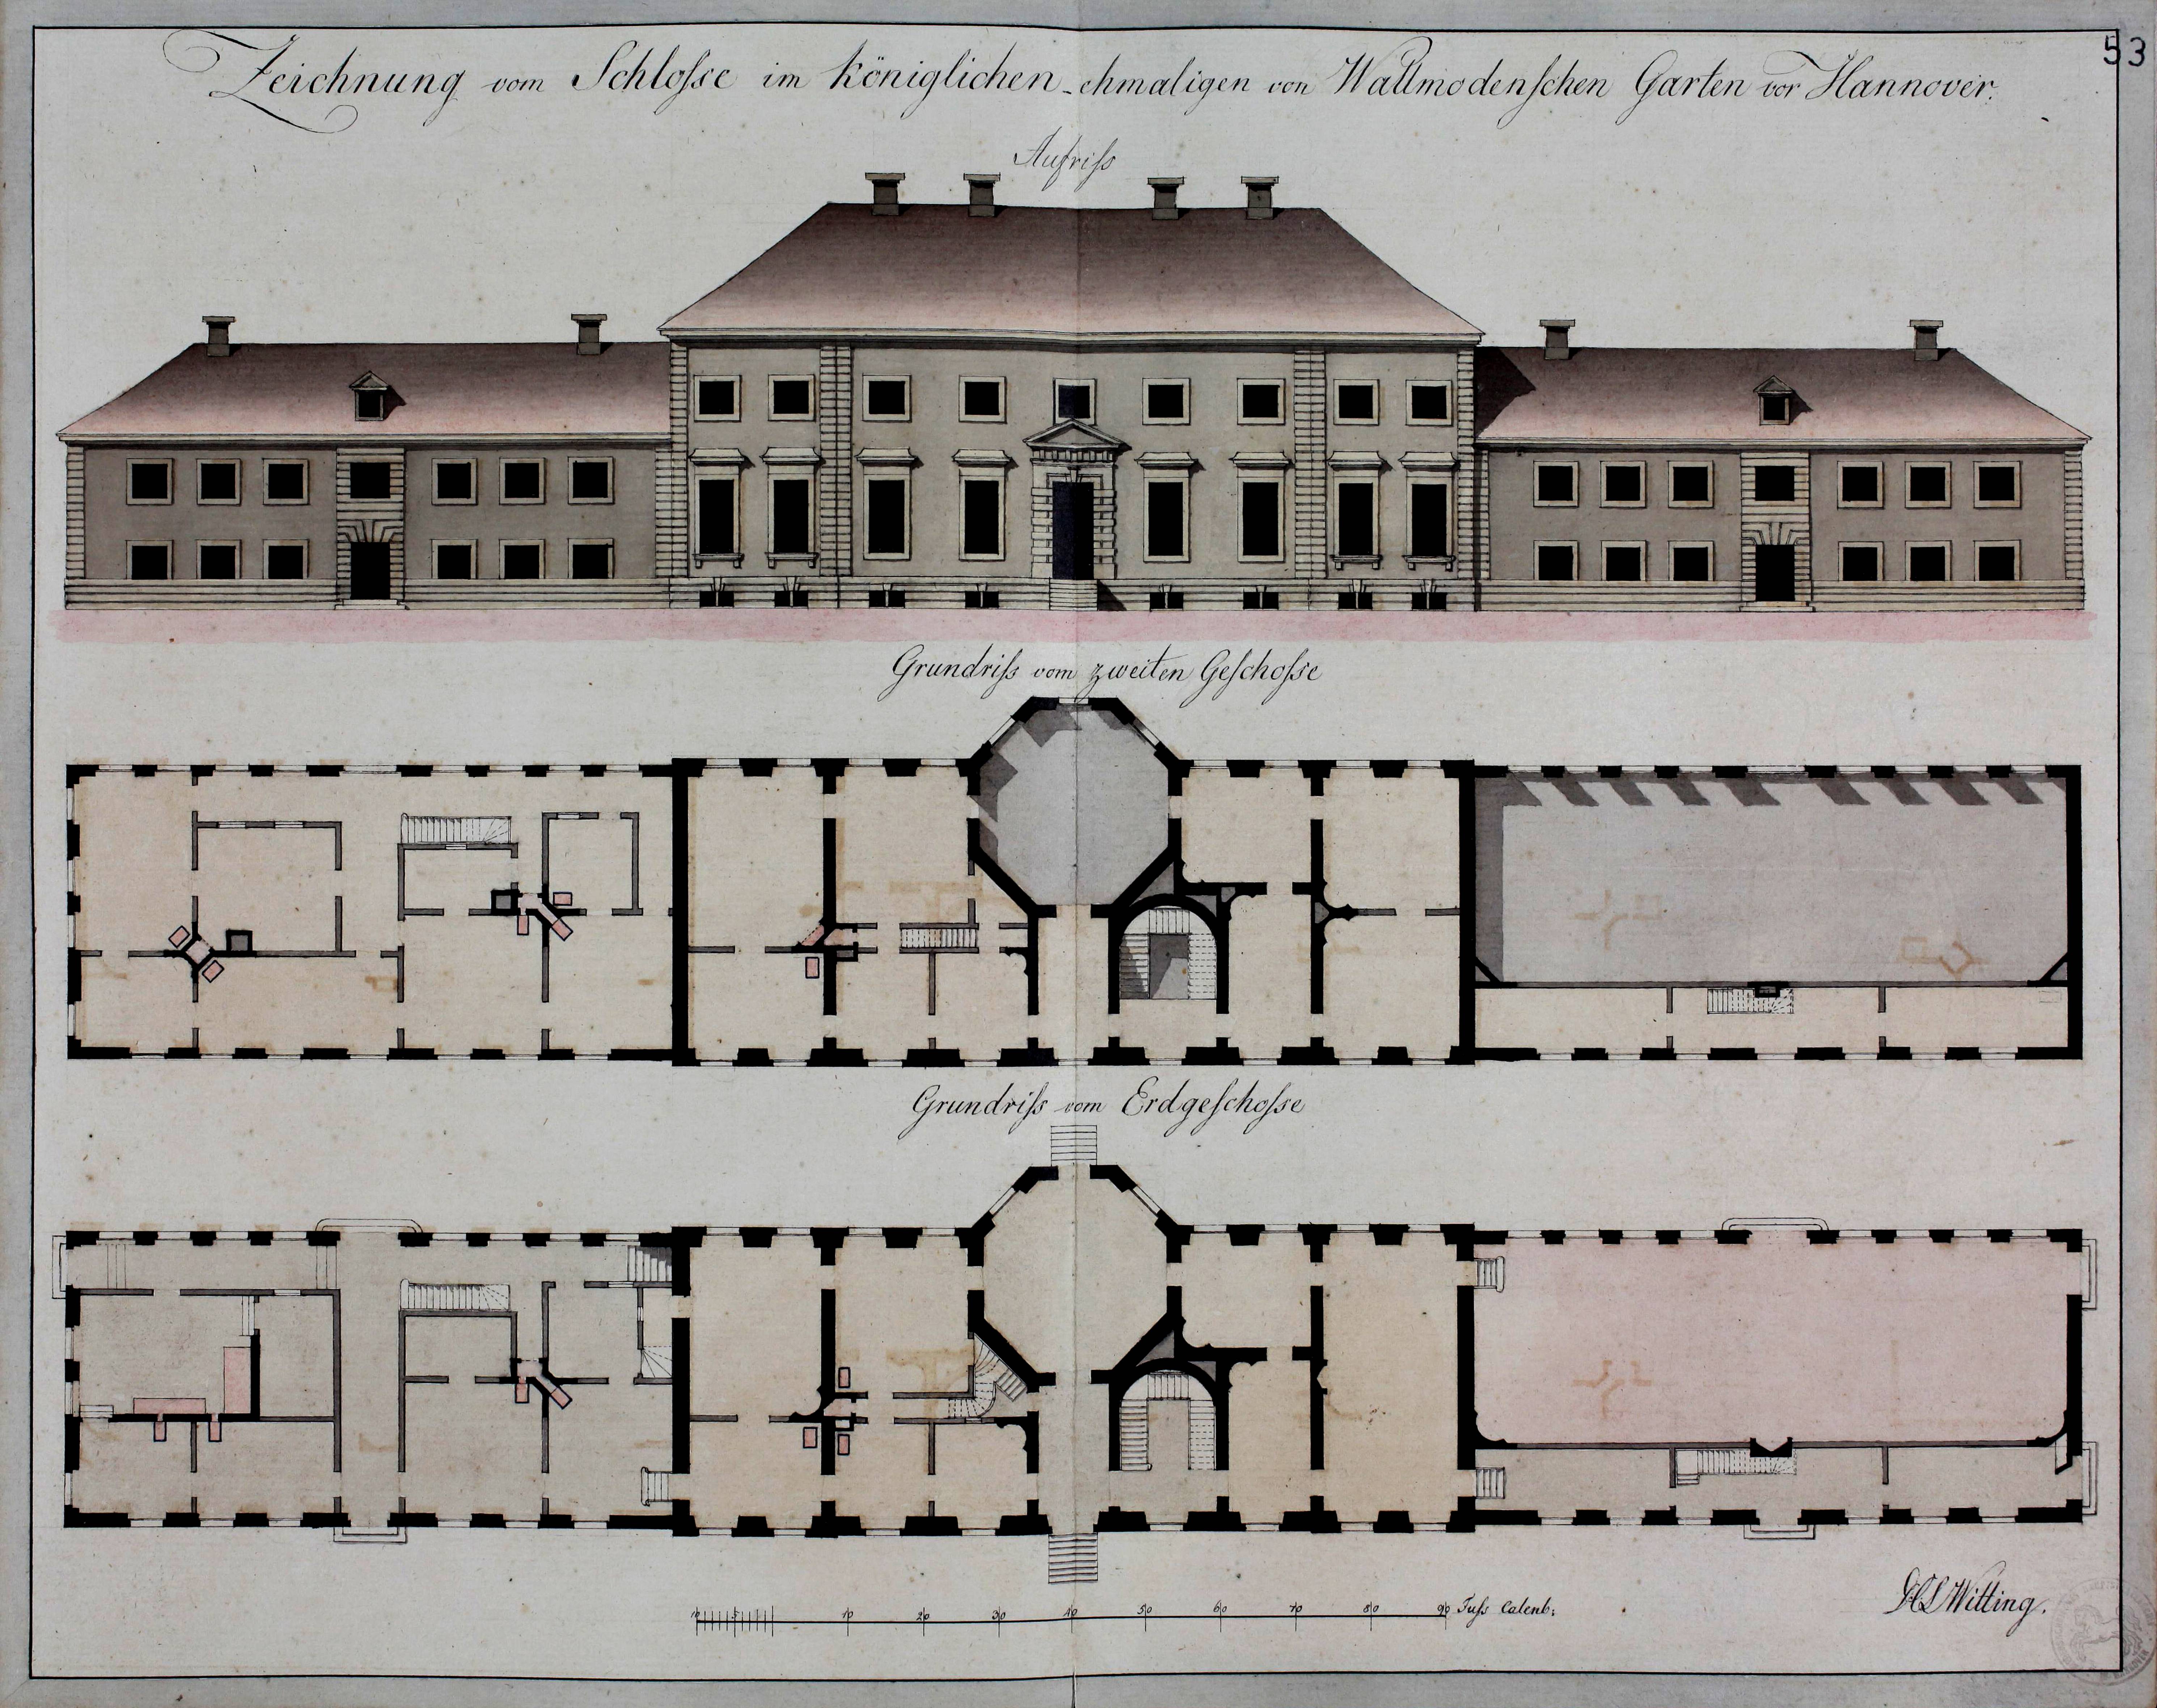 Fig. 7 Diederich Christian Ludewig Witting (active at the beginning of the 19th century), Plan and Elevation of the Wallmoden Palace, March 1818, pen, ink and water colour on paper, 31.5 Ã— 40cm, NiedersÃ¤chsisches Landesarchiv, Hanover, Sig. Hann. 92 Nr. 209, sheet 53